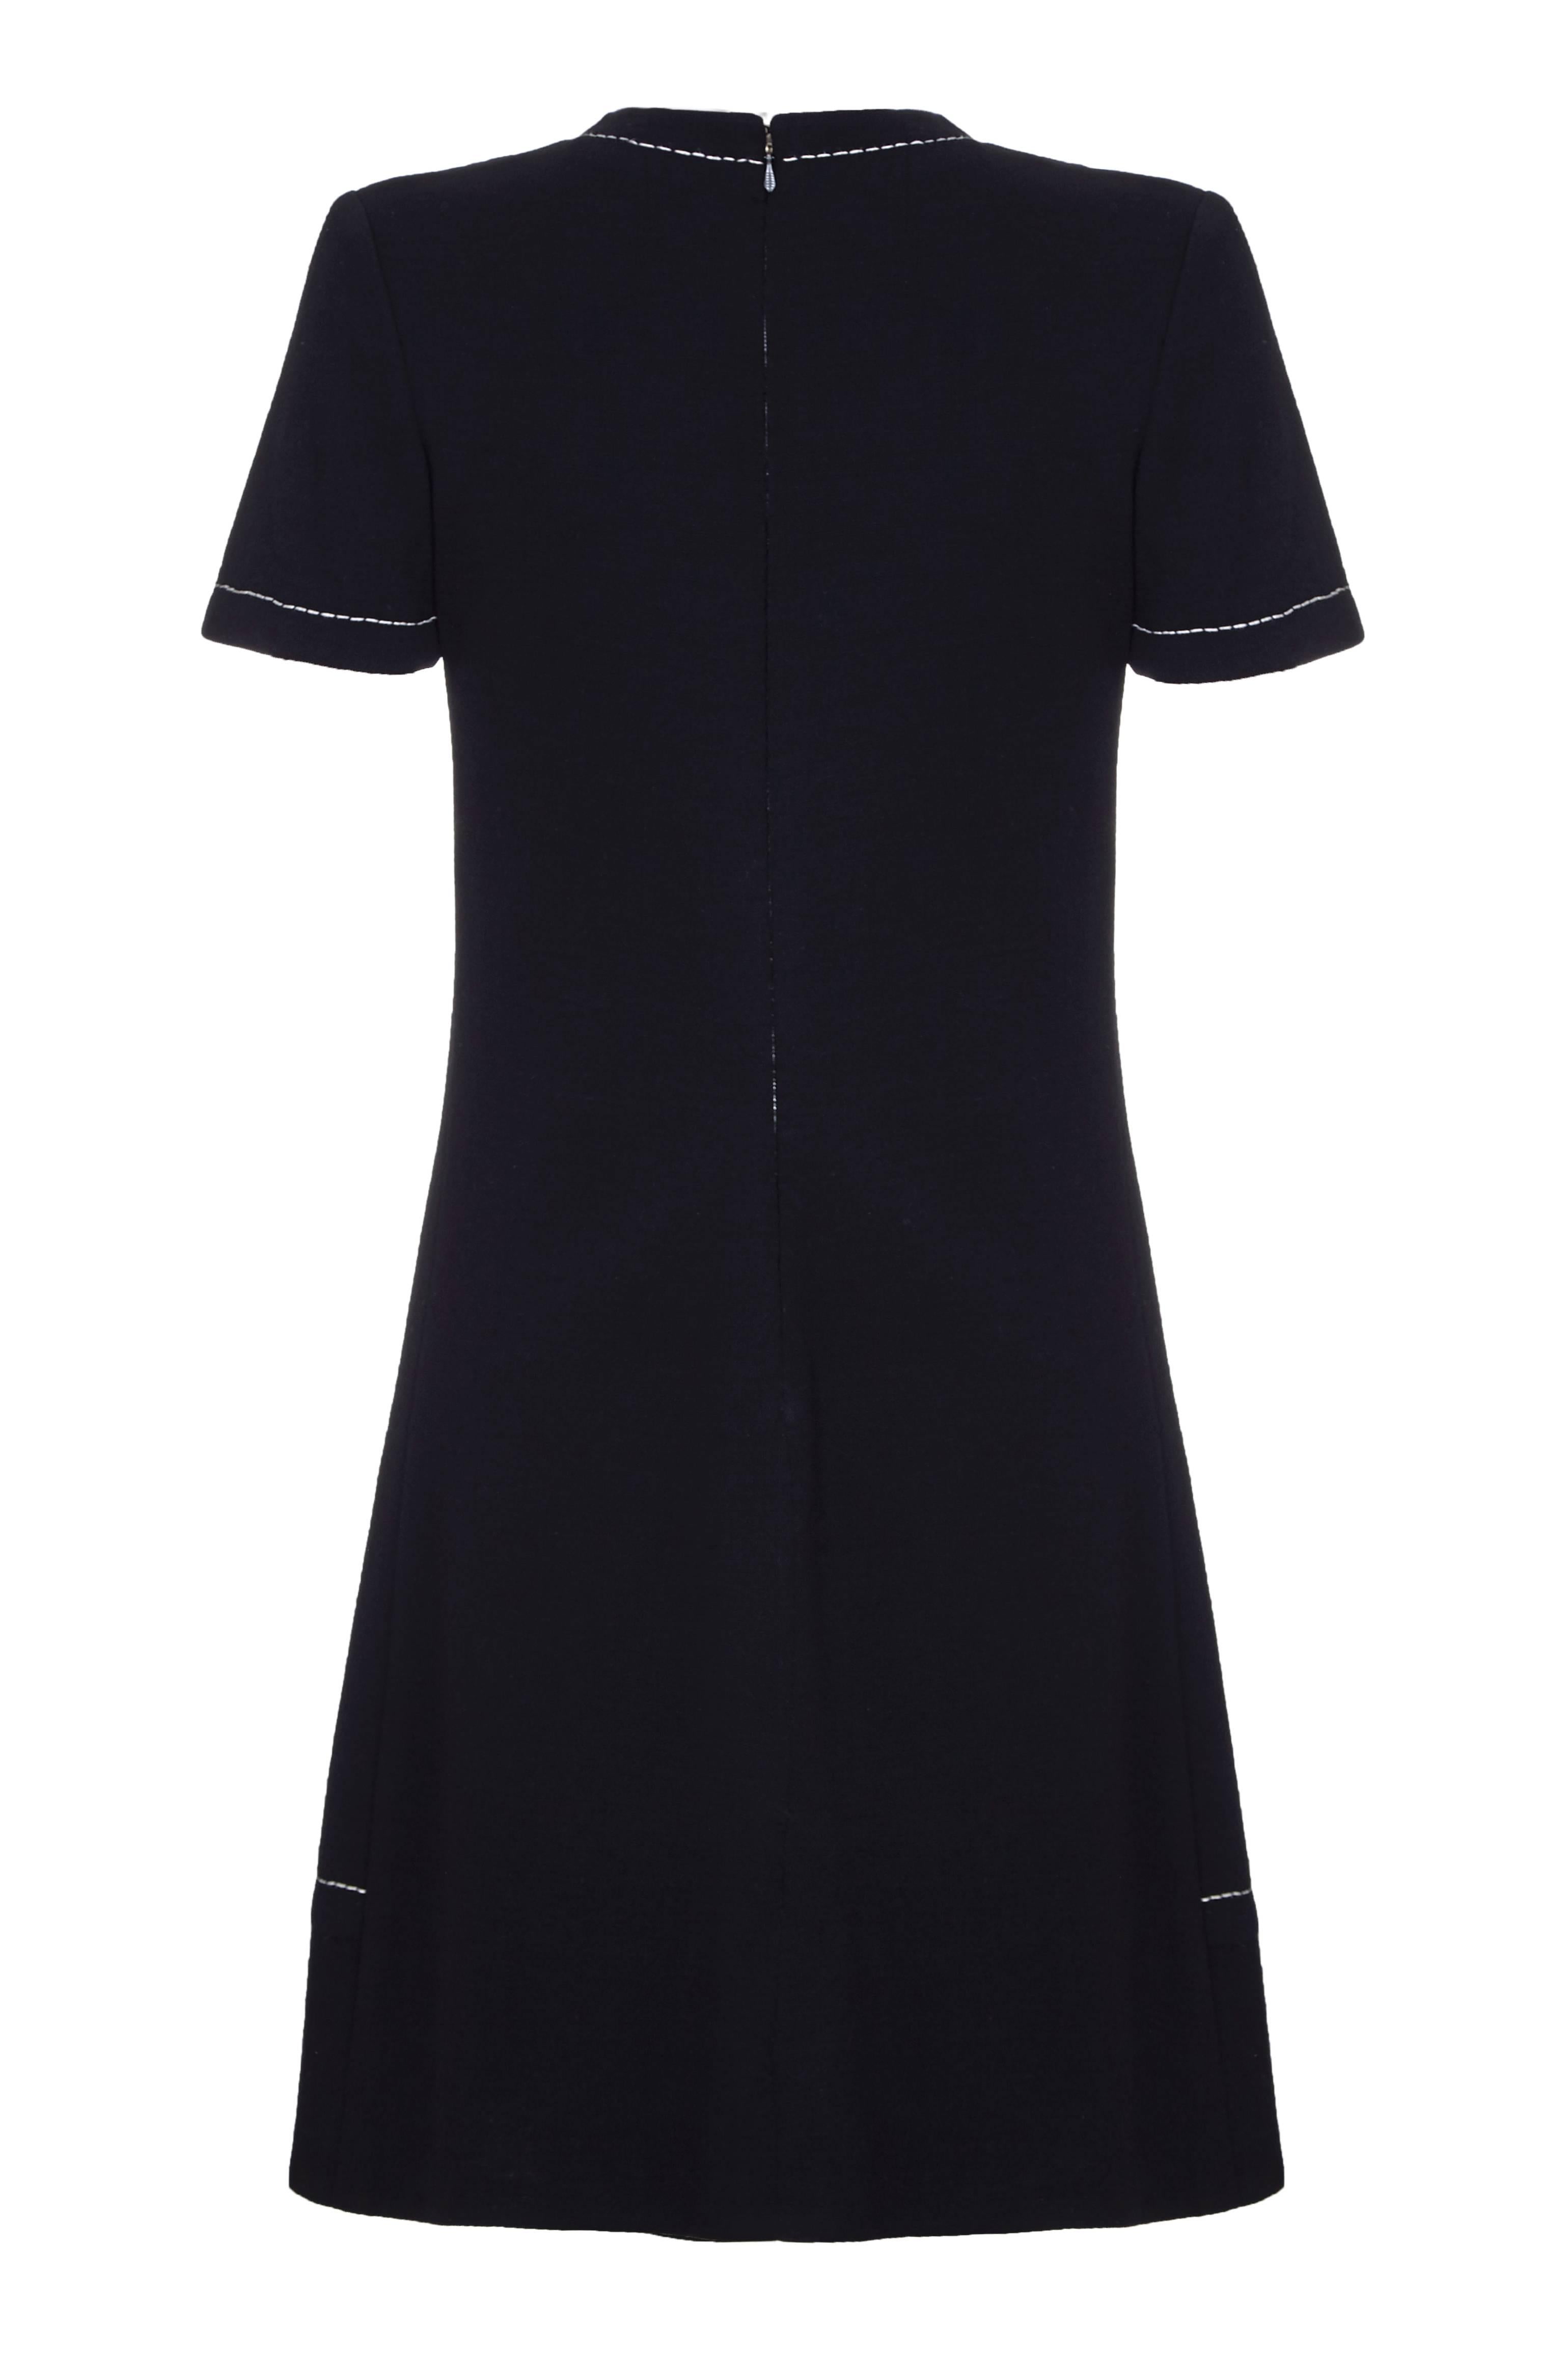 Super stylish 1960s black wool and contrast white stitch jersey dress from the house of Jean Patou.  The designer could be either Karl Lagerfeld or Michel Goma who both designed for the French fashion house during this period.  Fully lined, the